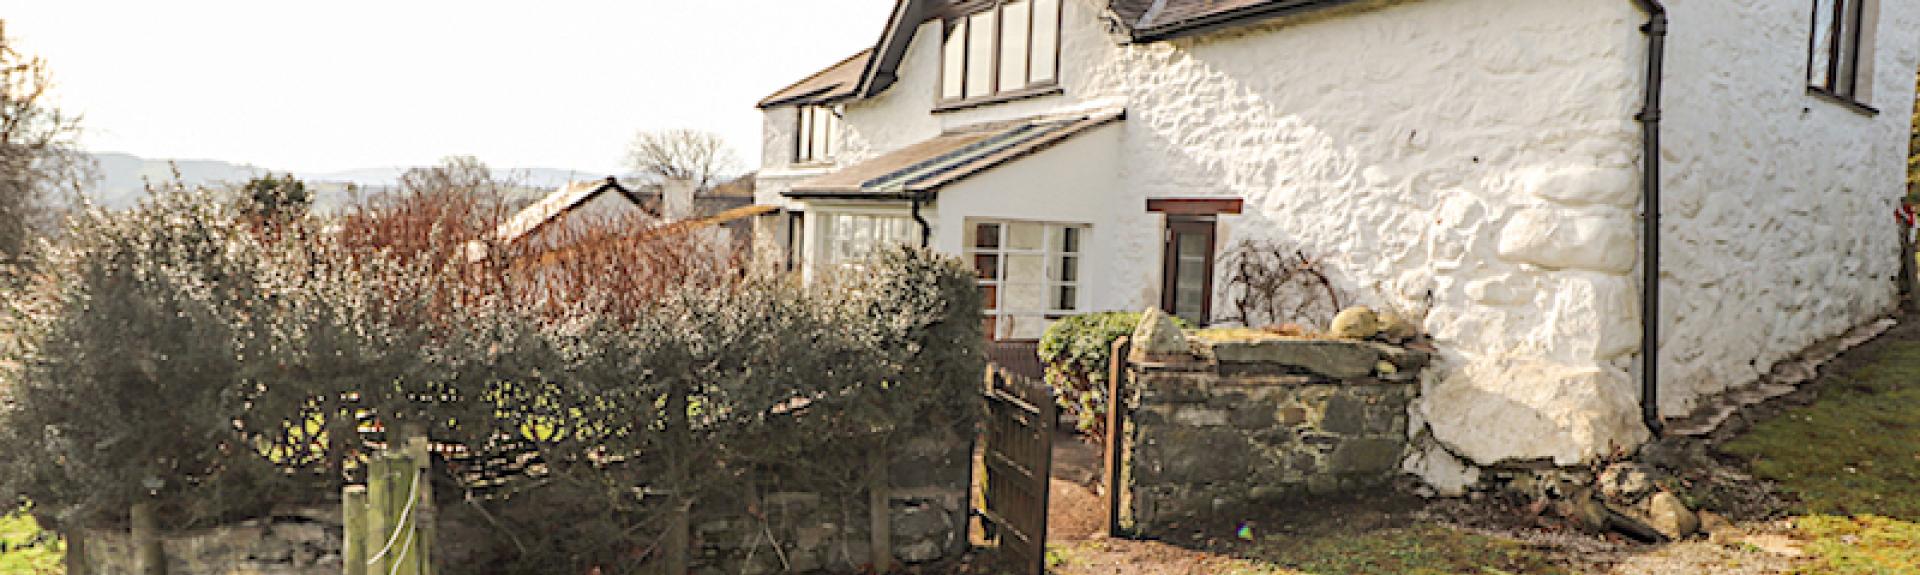 Exterior of a large whitewashed Welsh farmhouse and garden.